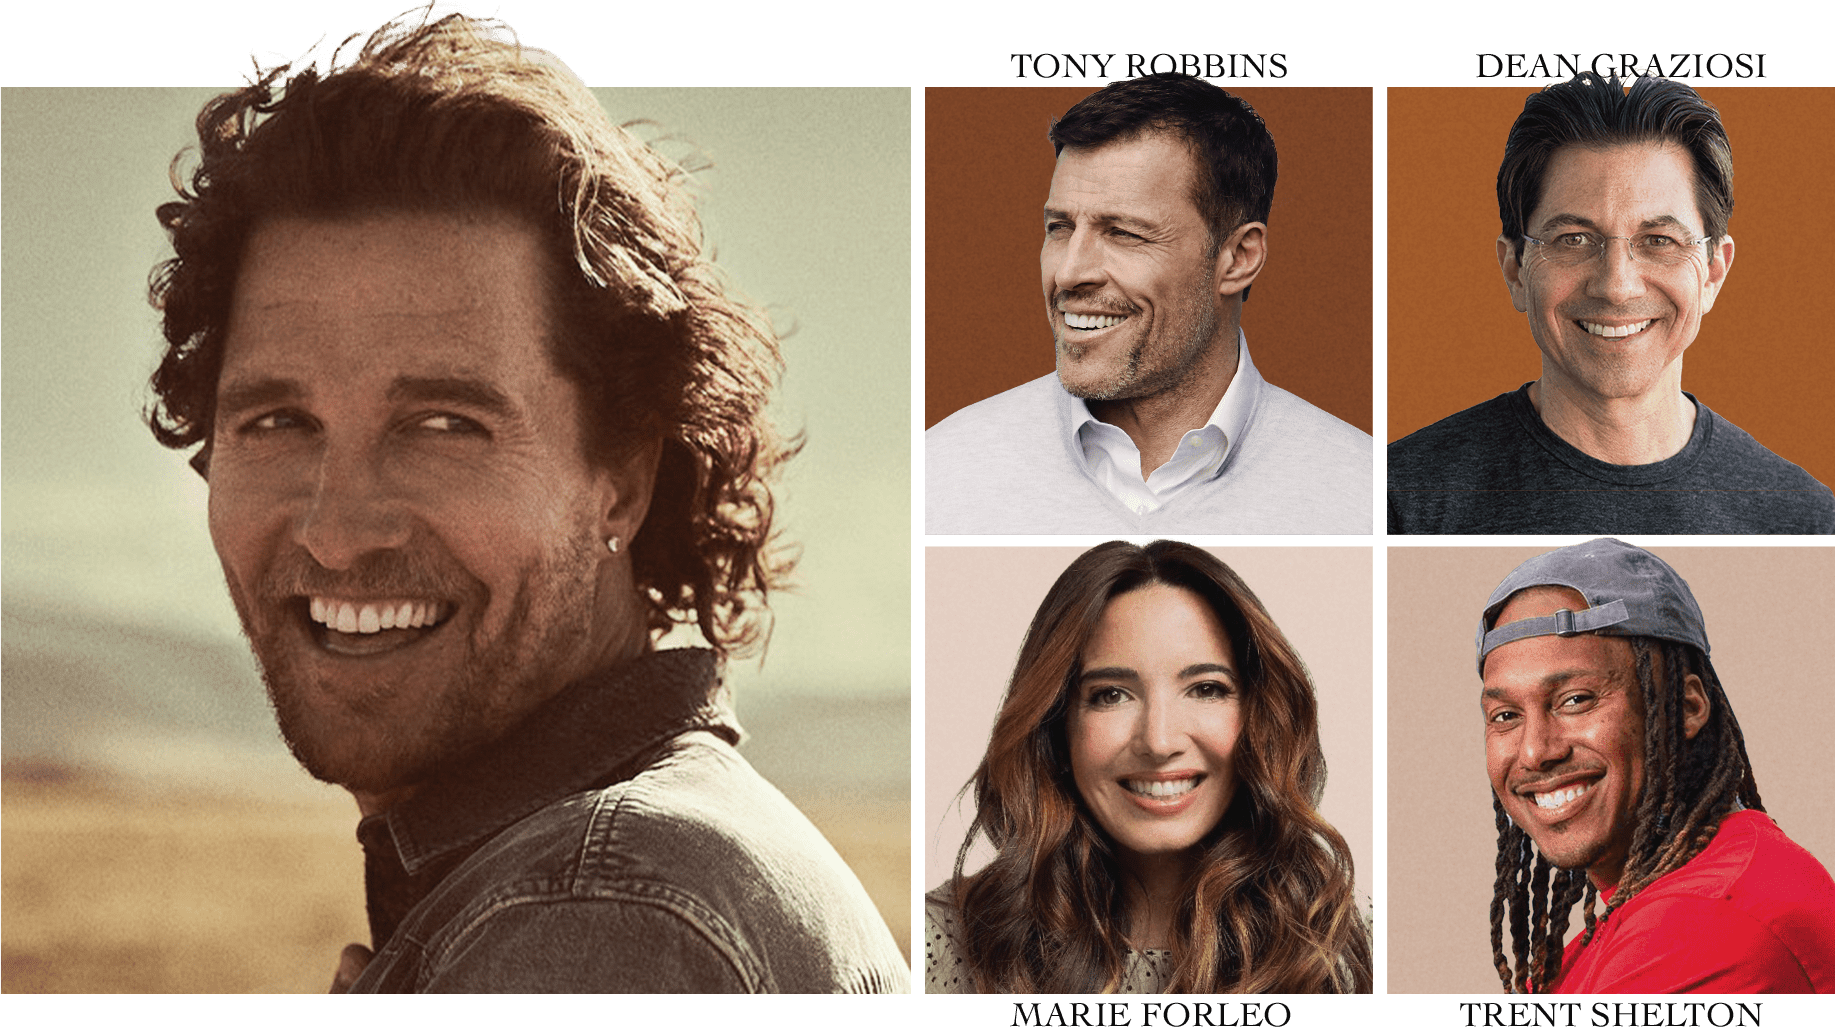 Promotional image for Matthew McConaughey's Art Of Livin' event featuring McConaughey, Tony Robbins, Dean Graziosi, and Trent Shelton